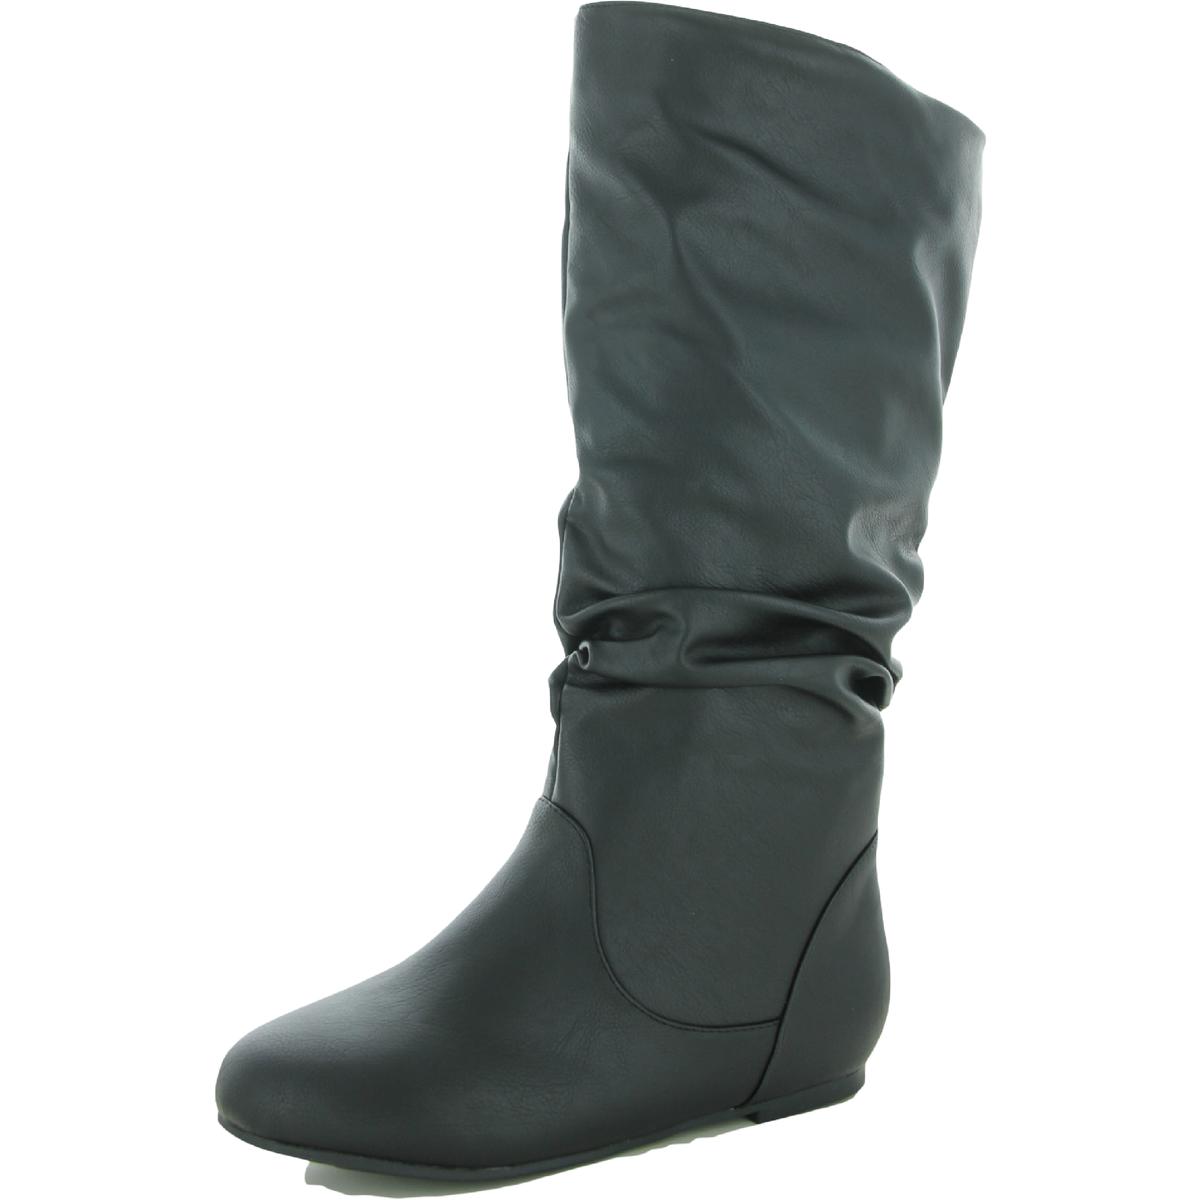 Journee Collection Womens Wide Calf Slouchy Mid-Calf Boots